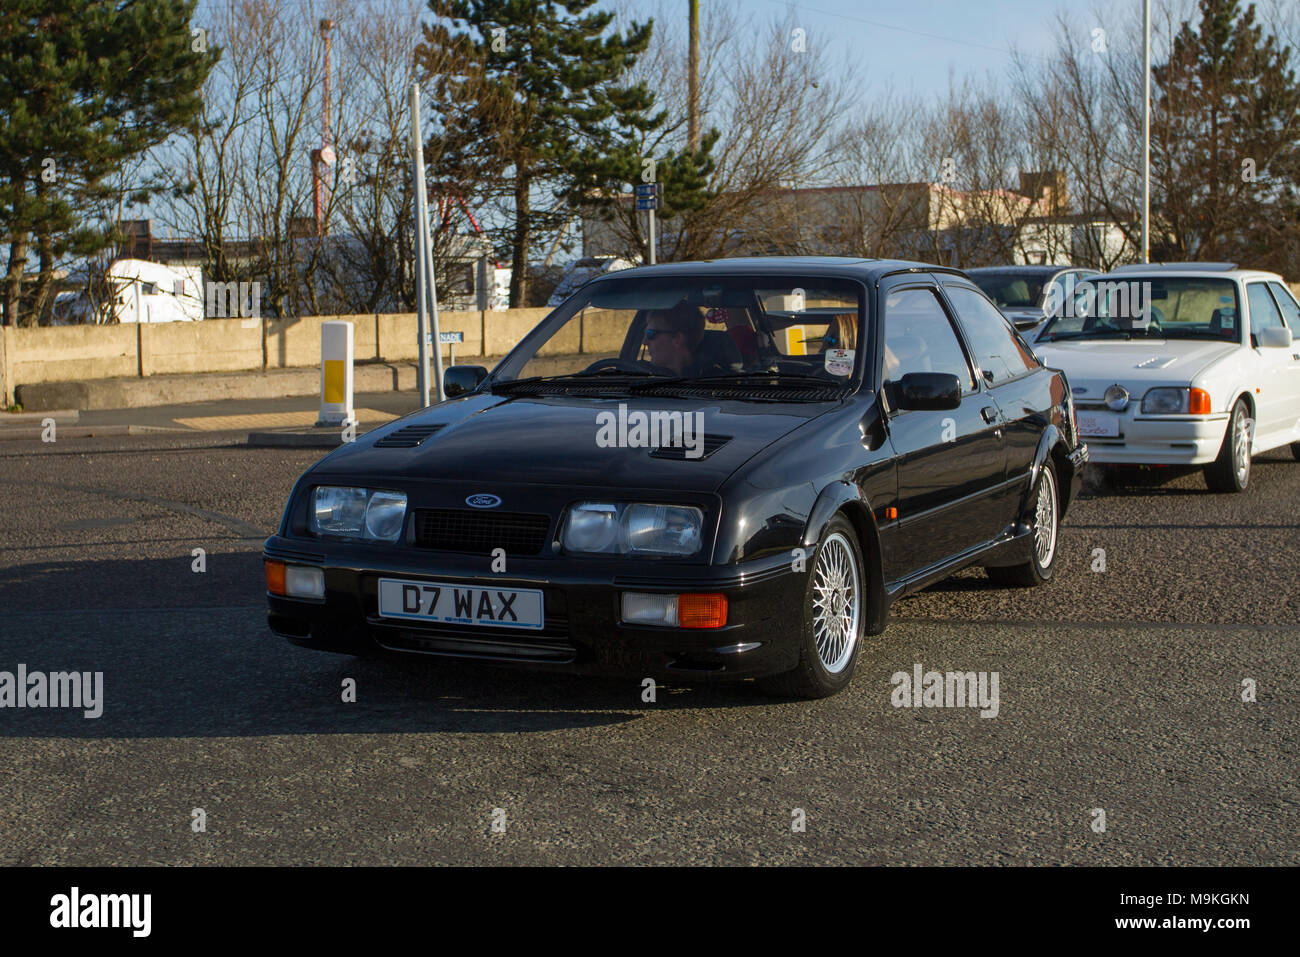 1986 black Ford Sierra Rs Cosworth petrol hatchback at the North-West Supercar event as cars and tourists arrive in the coastal resort. 1980s SuperCars are bumper to bumper on the seafront esplanade as classic & sports car enthusiasts enjoy a motoring day out. Stock Photo